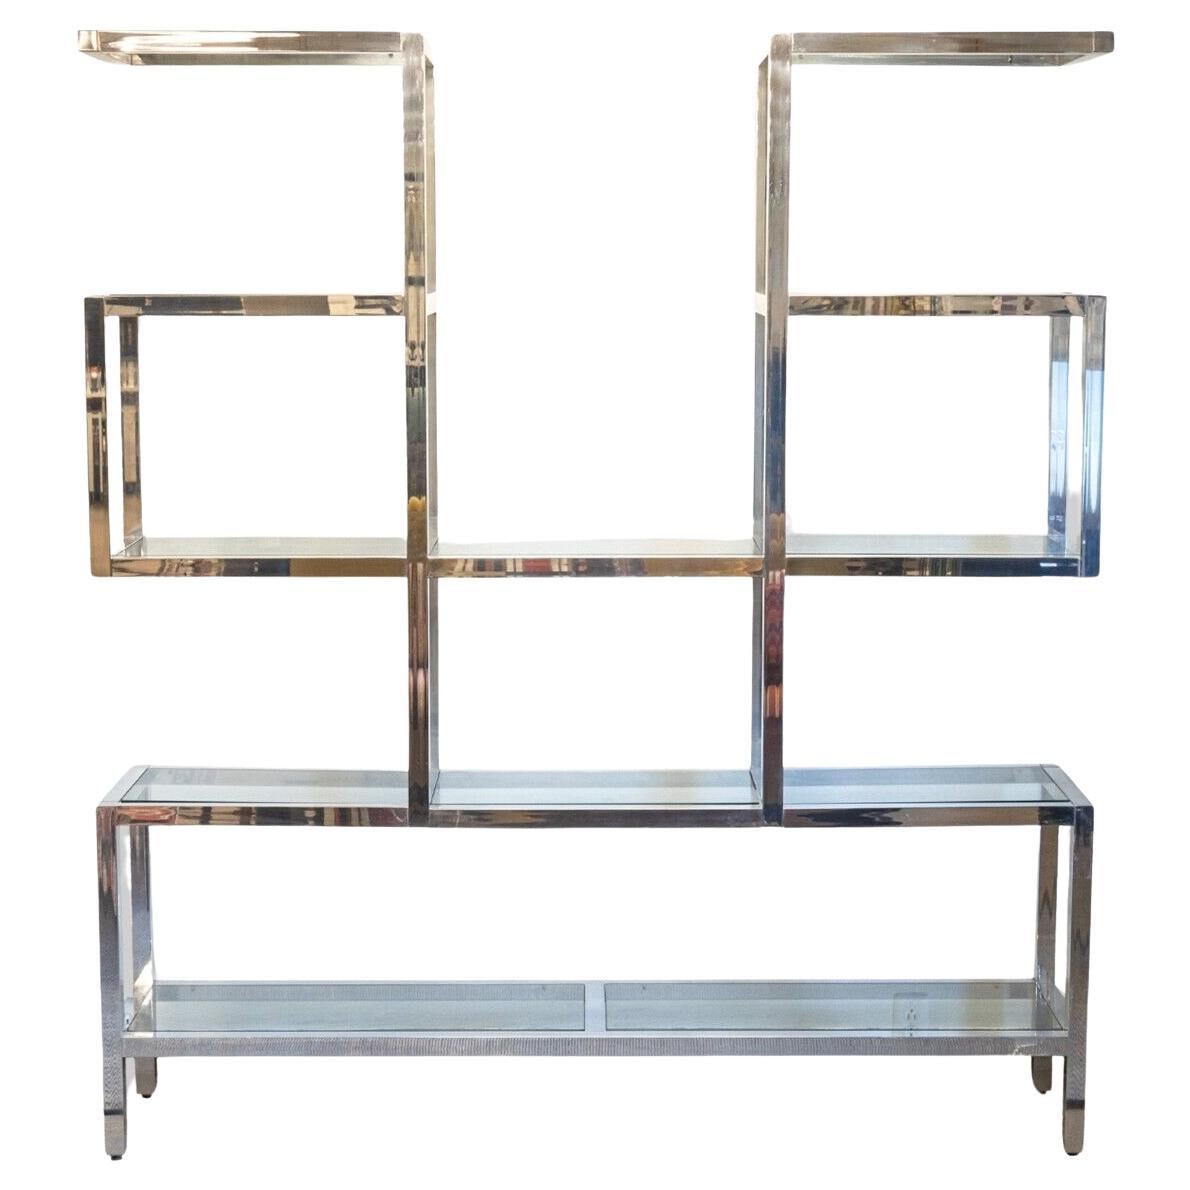 Milo Baughman Style Large Chrome and Glass Floating Etagere Shelving Wall Unit For Sale